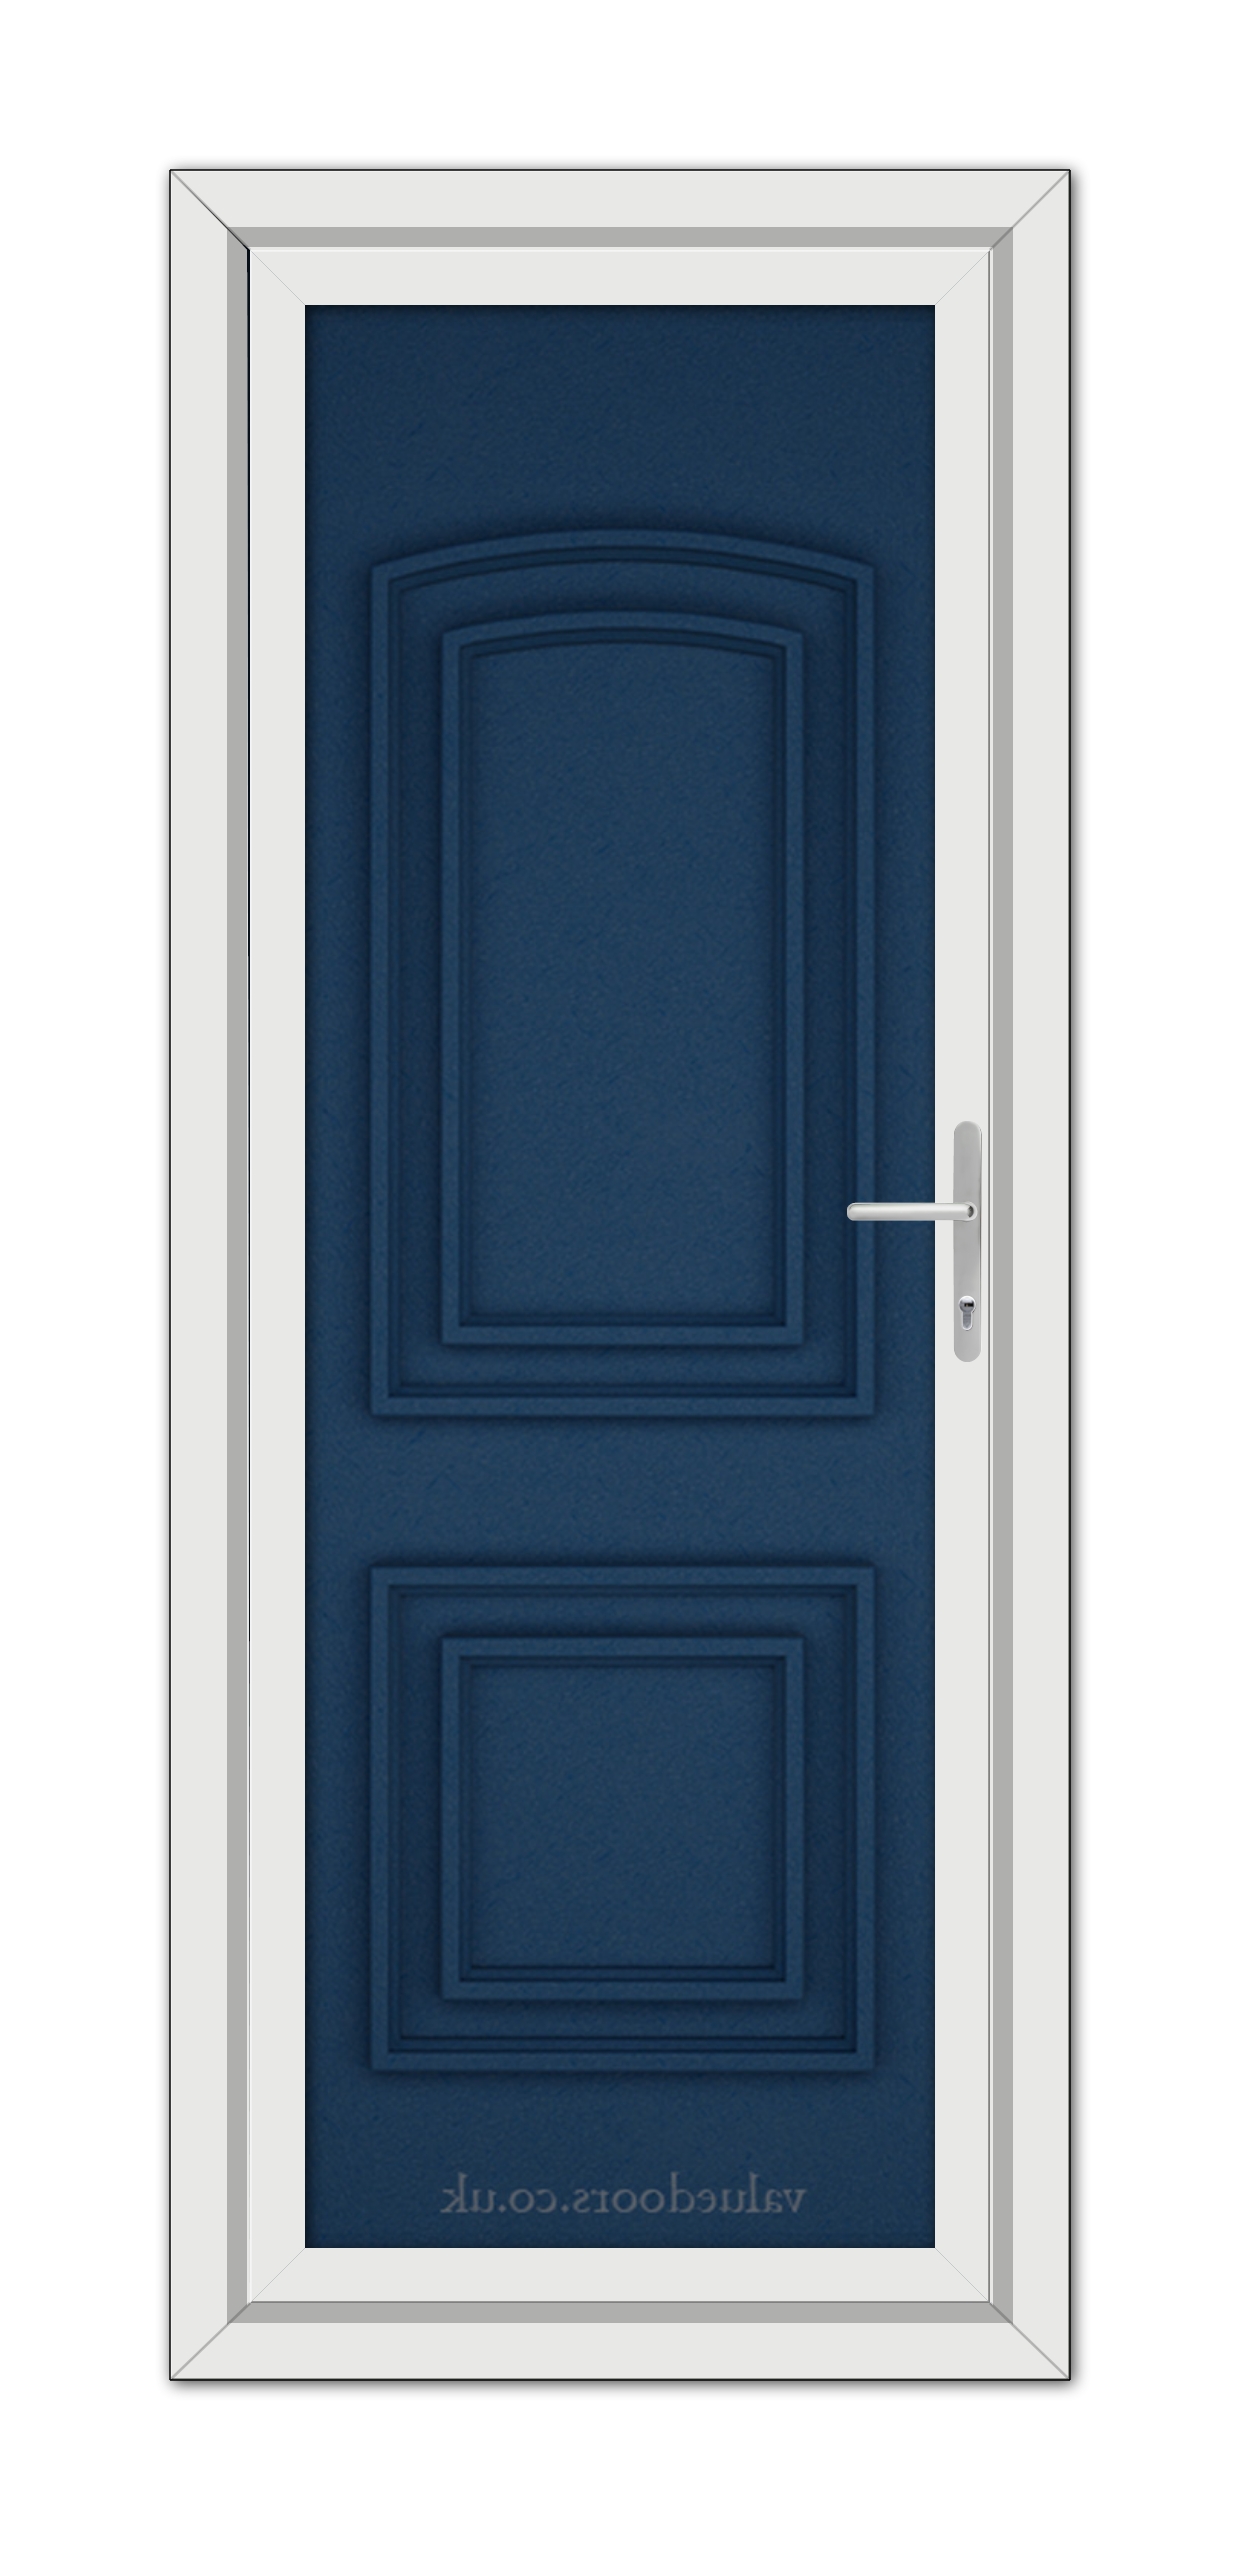 A modern, vertical rectangular white Blue Balmoral Solid uPVC door frame enclosing a navy blue Blue Balmoral Solid uPVC door with a simple silver handle, featuring decorative panels.